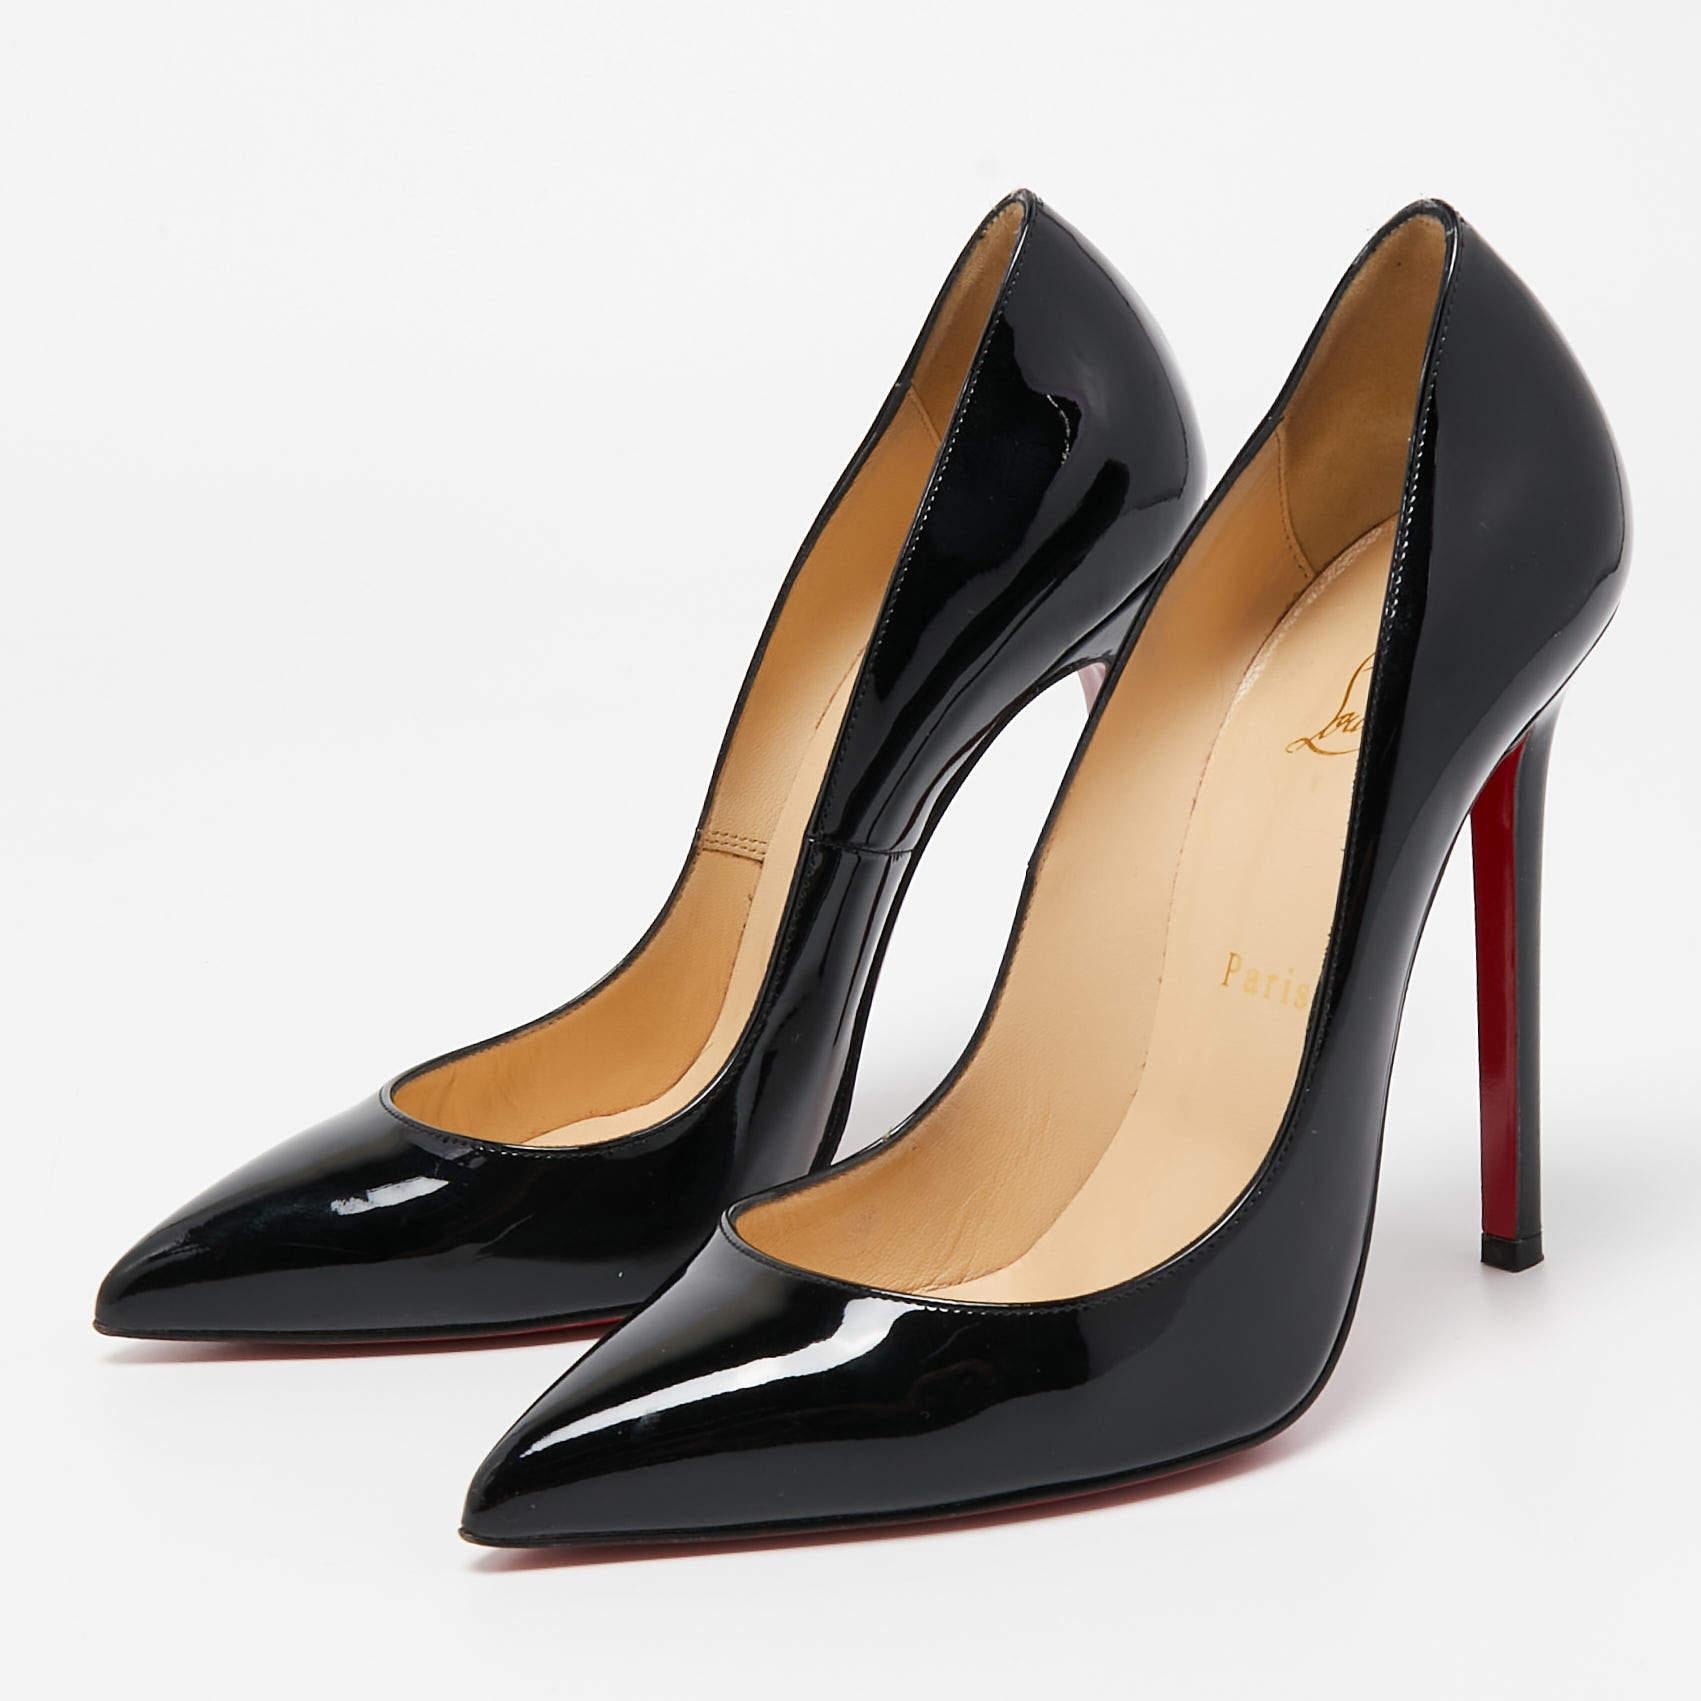 Discover the epitome of elegance with these Christian Louboutin women's pumps. Meticulously designed, these heels seamlessly marry fashion and comfort, ensuring you shine in every setting.

